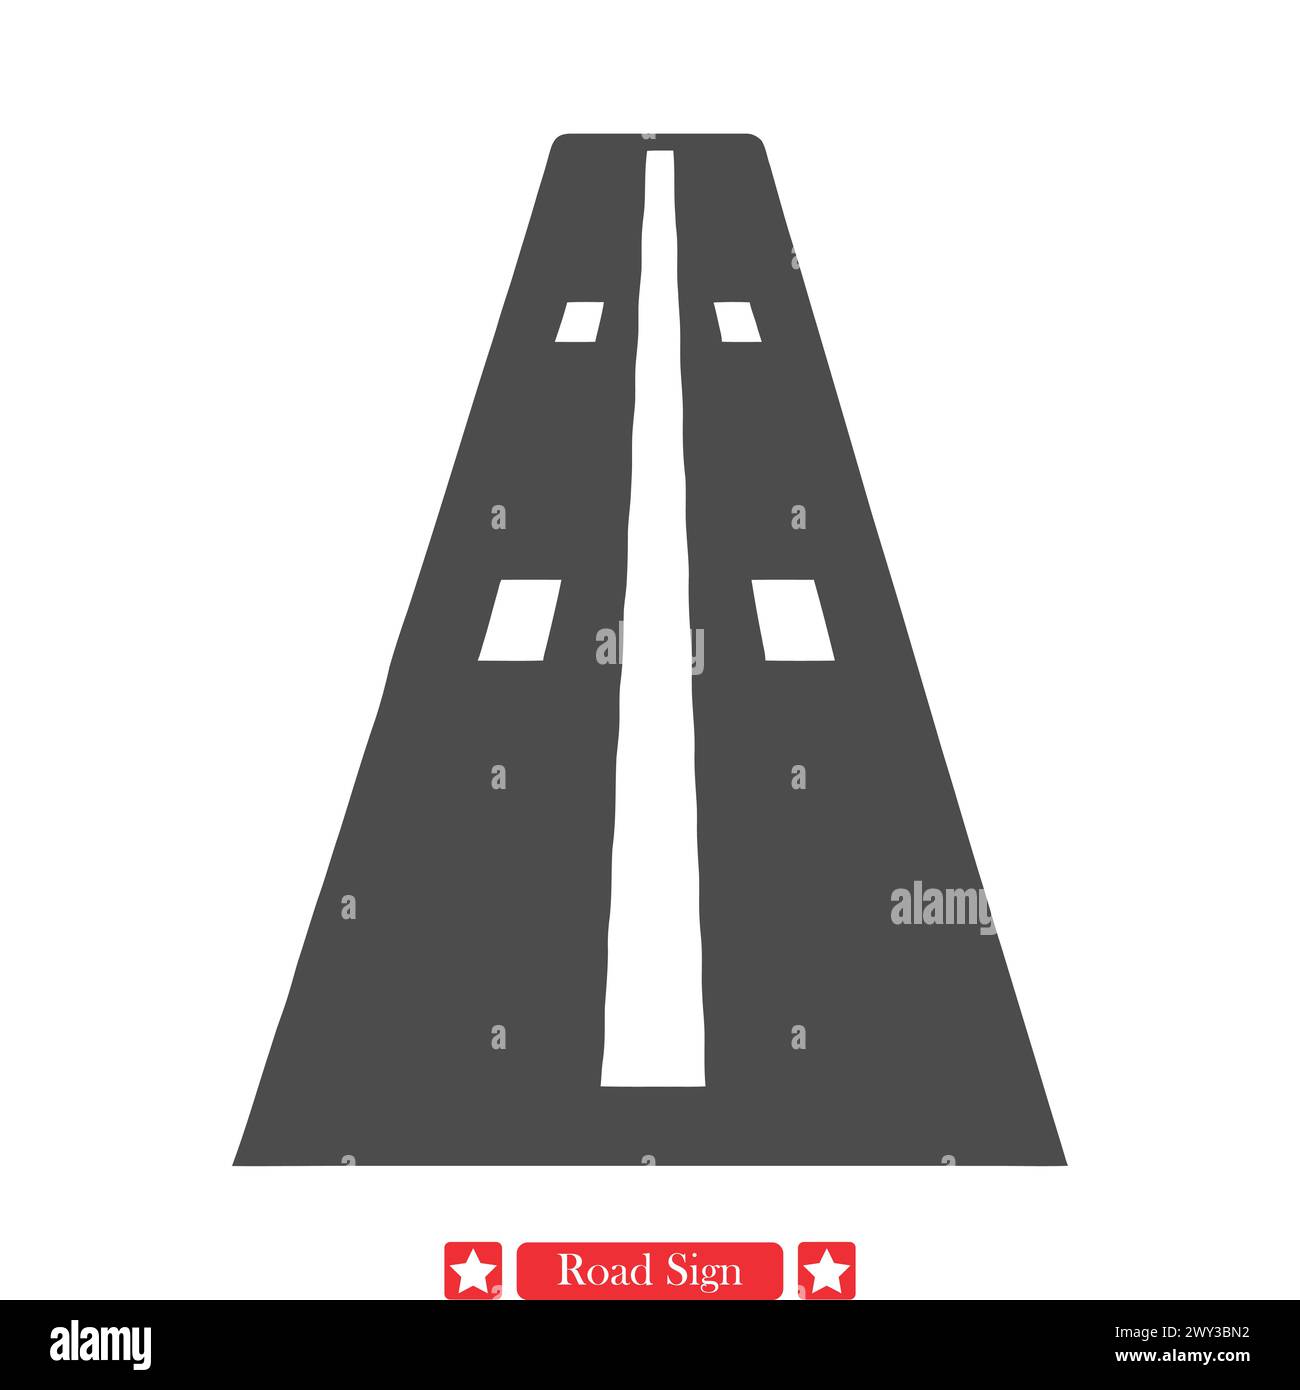 Urban Mapping Toolkit Completary Road Sign silhouette Collection Illustrazione Vettoriale